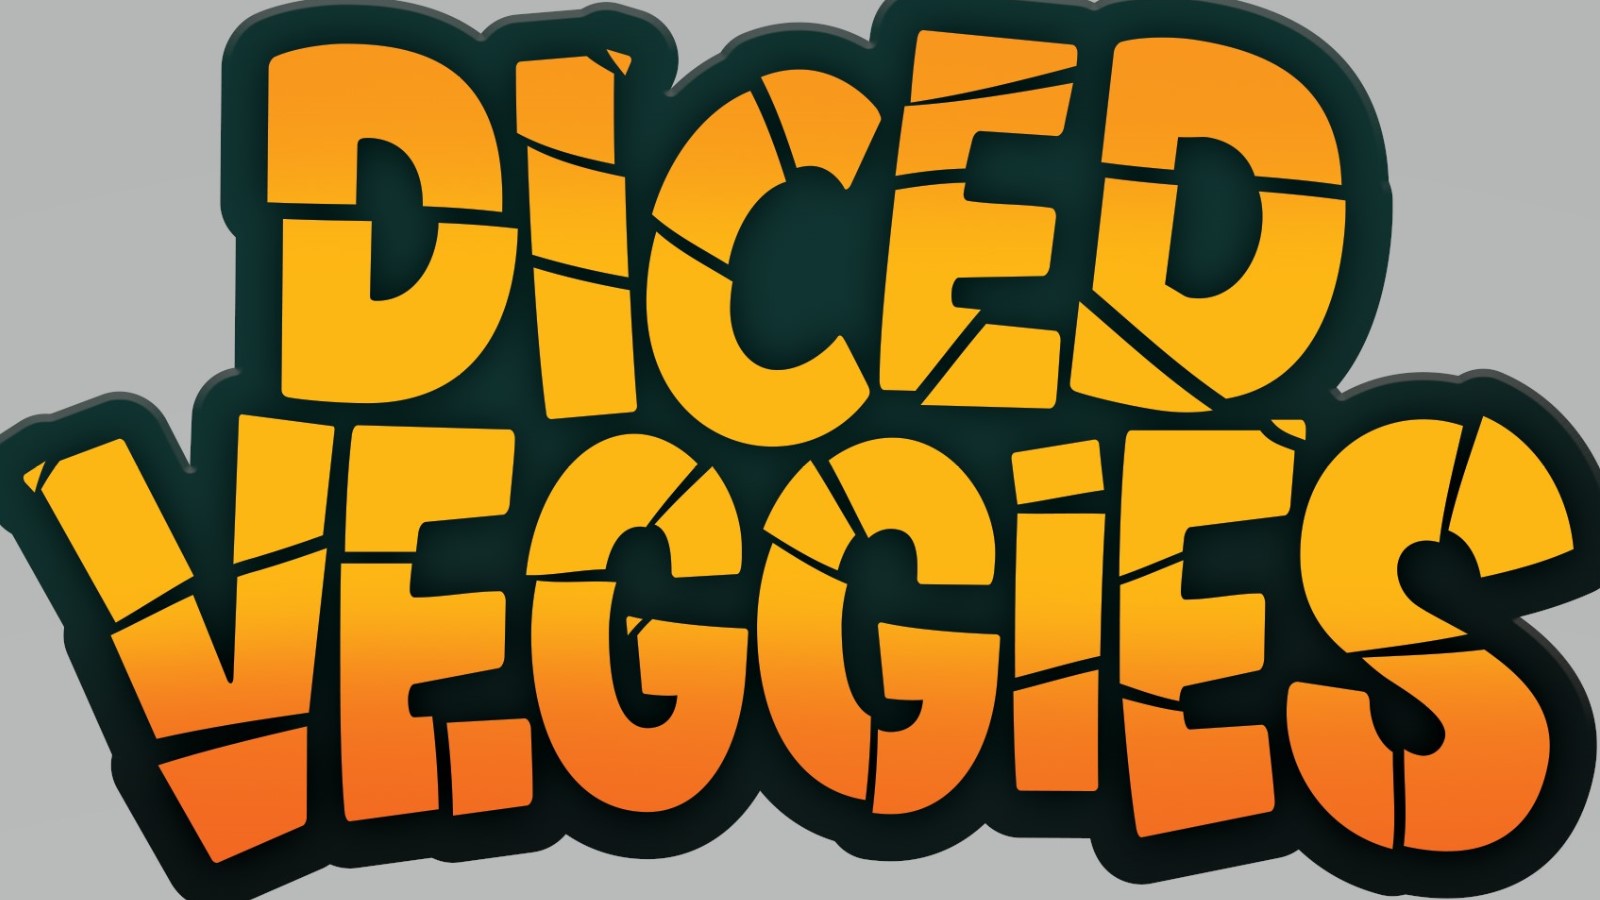 KTBG announces Diced Veggies, a game designed by kids but fun for all ages